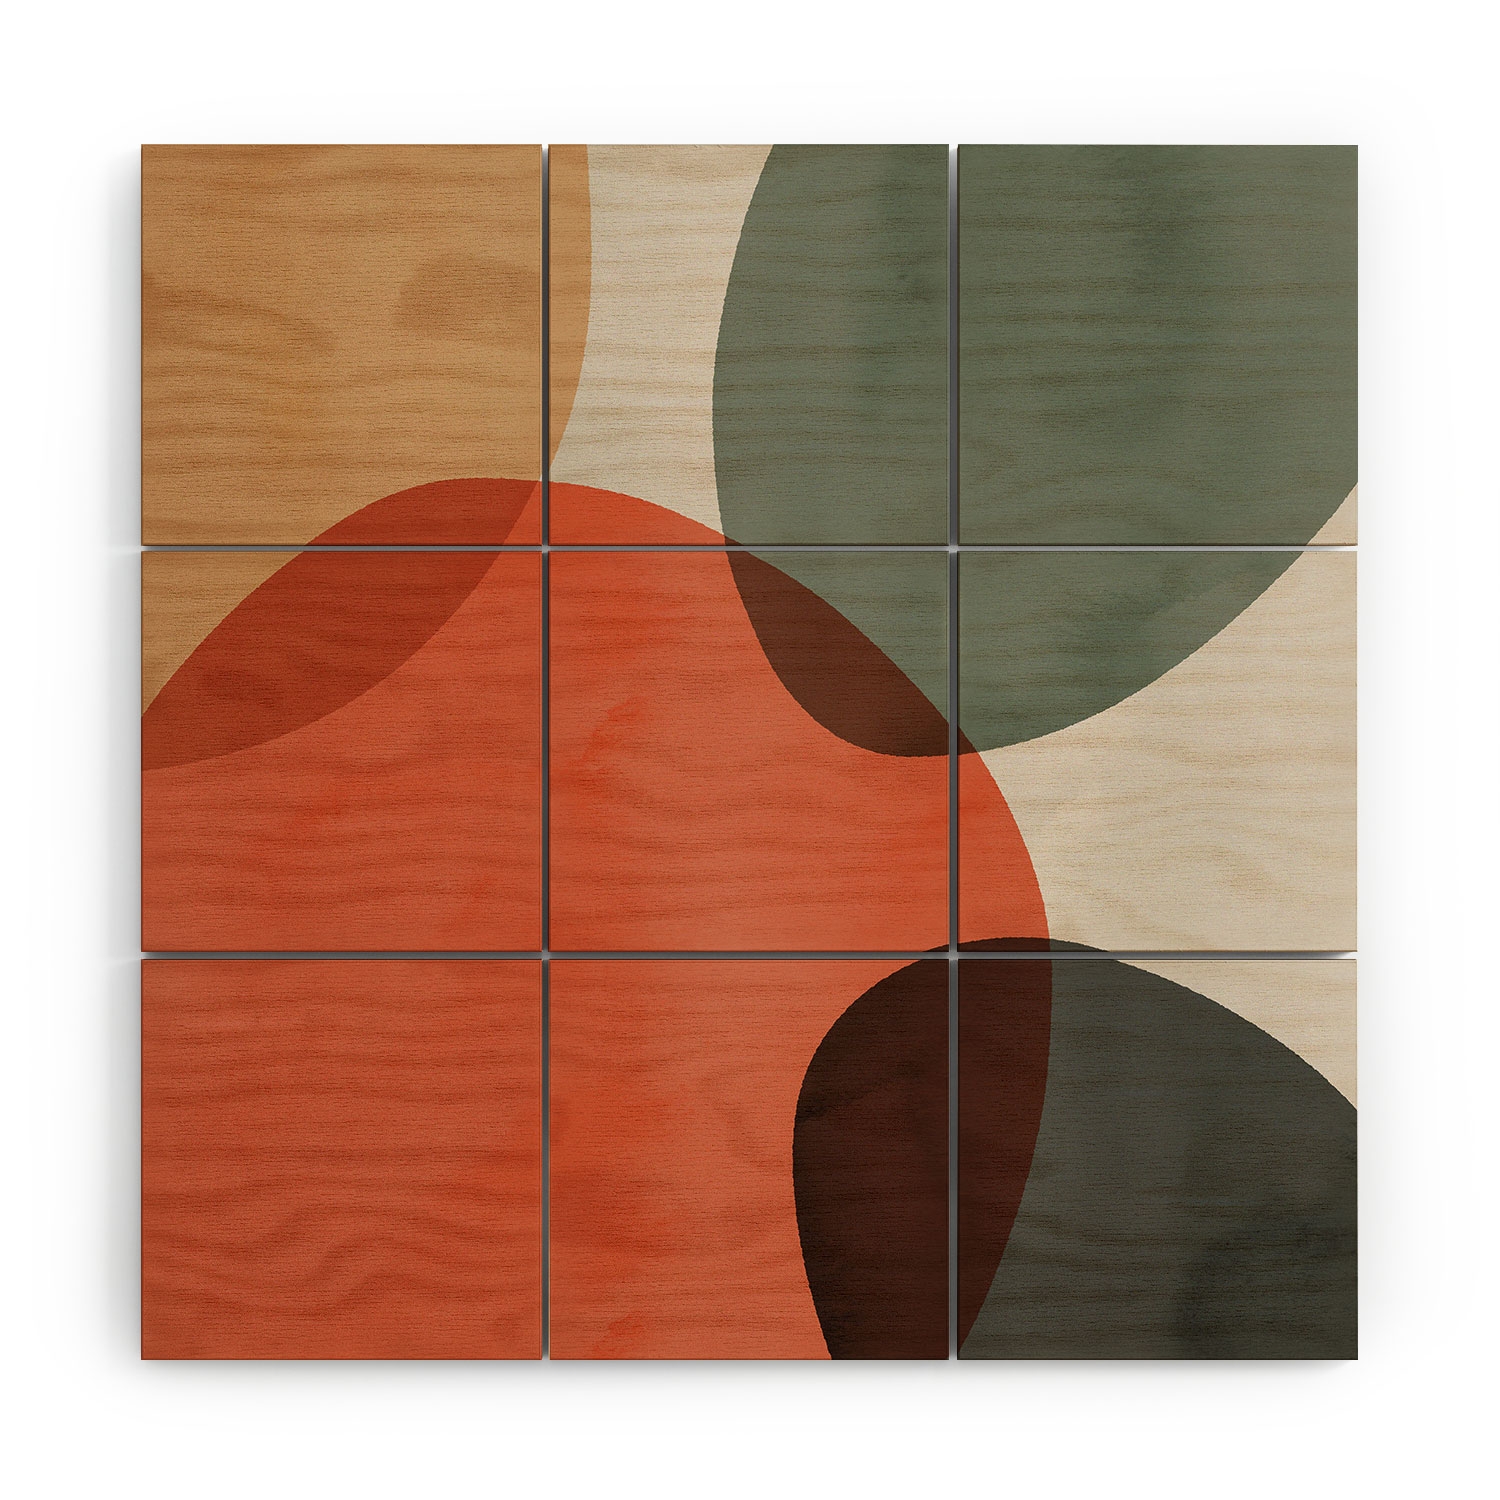 Winter Abstract Theme by Emanuela Carratoni - Wood Wall Mural5' x 5' (Nine 20" wood Squares) - Image 3